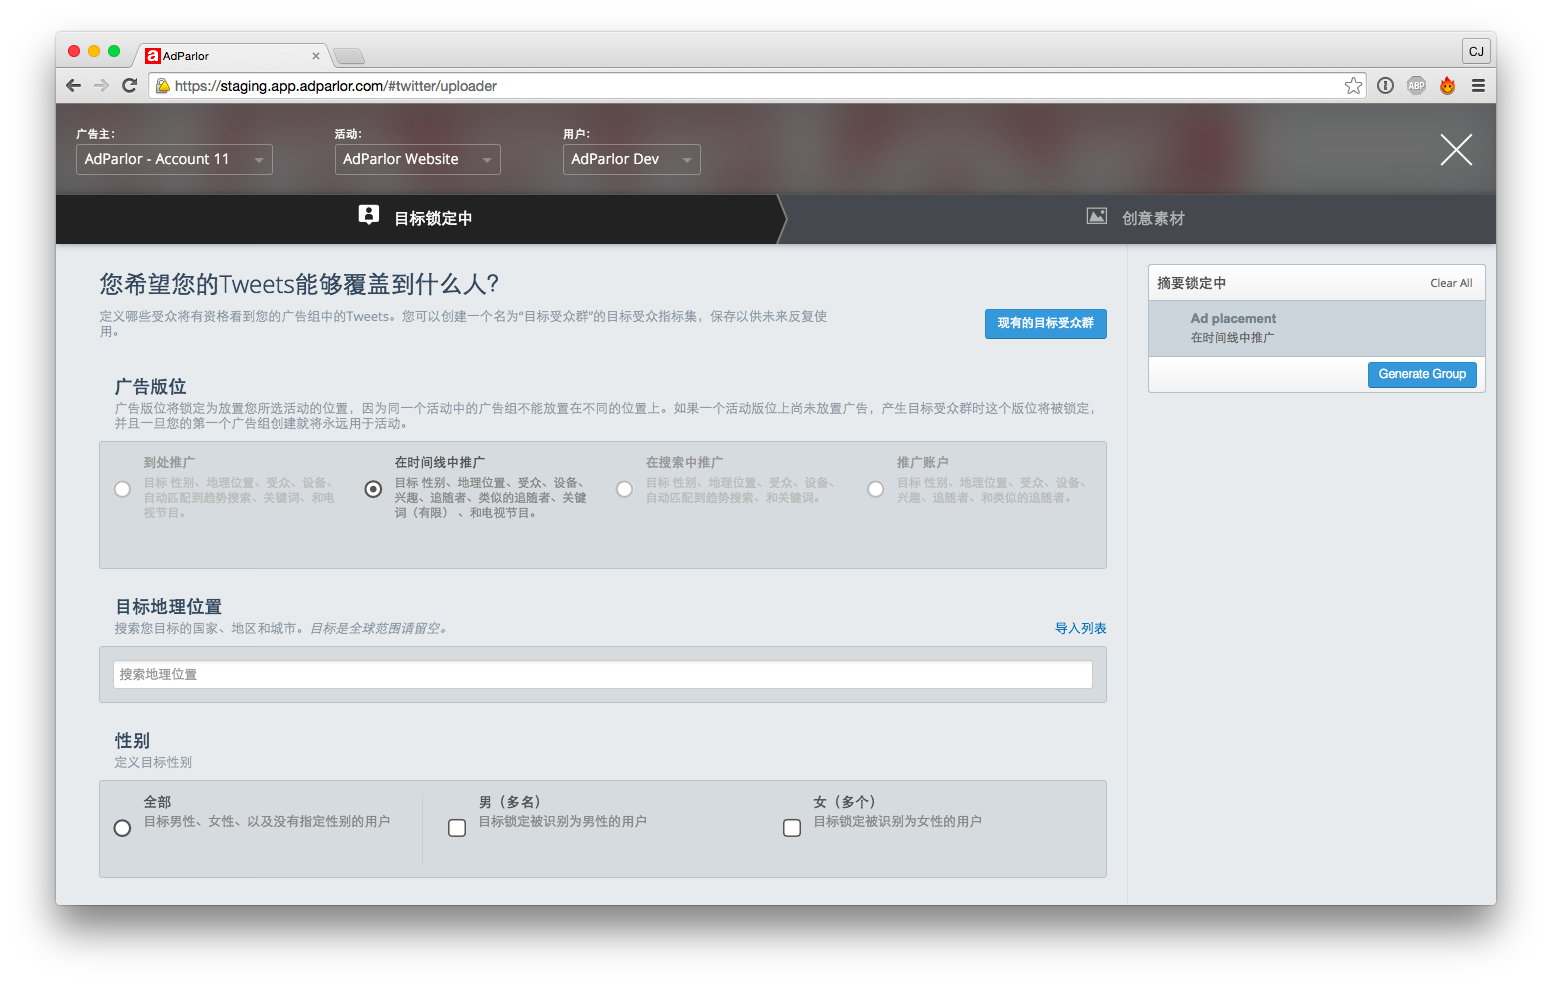 Adknowledge Asia Pacific Releases Chinese User Interface Platform For Facebook And Twitter Campaign Management